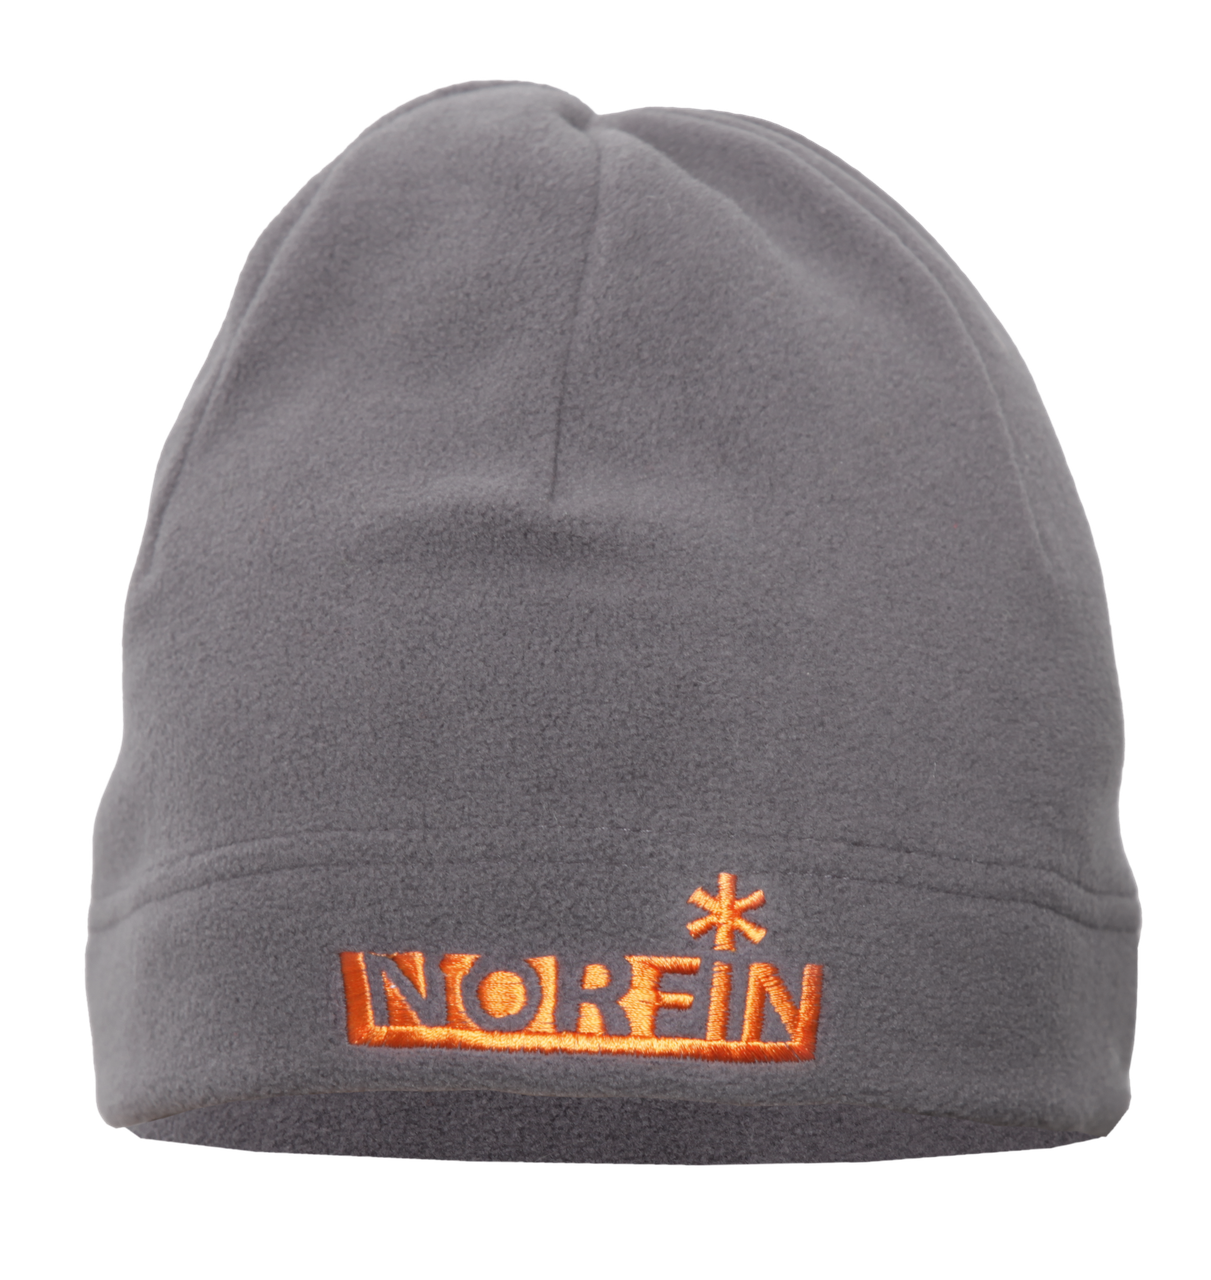 Шапка Norfin GY 302783-GY-XL